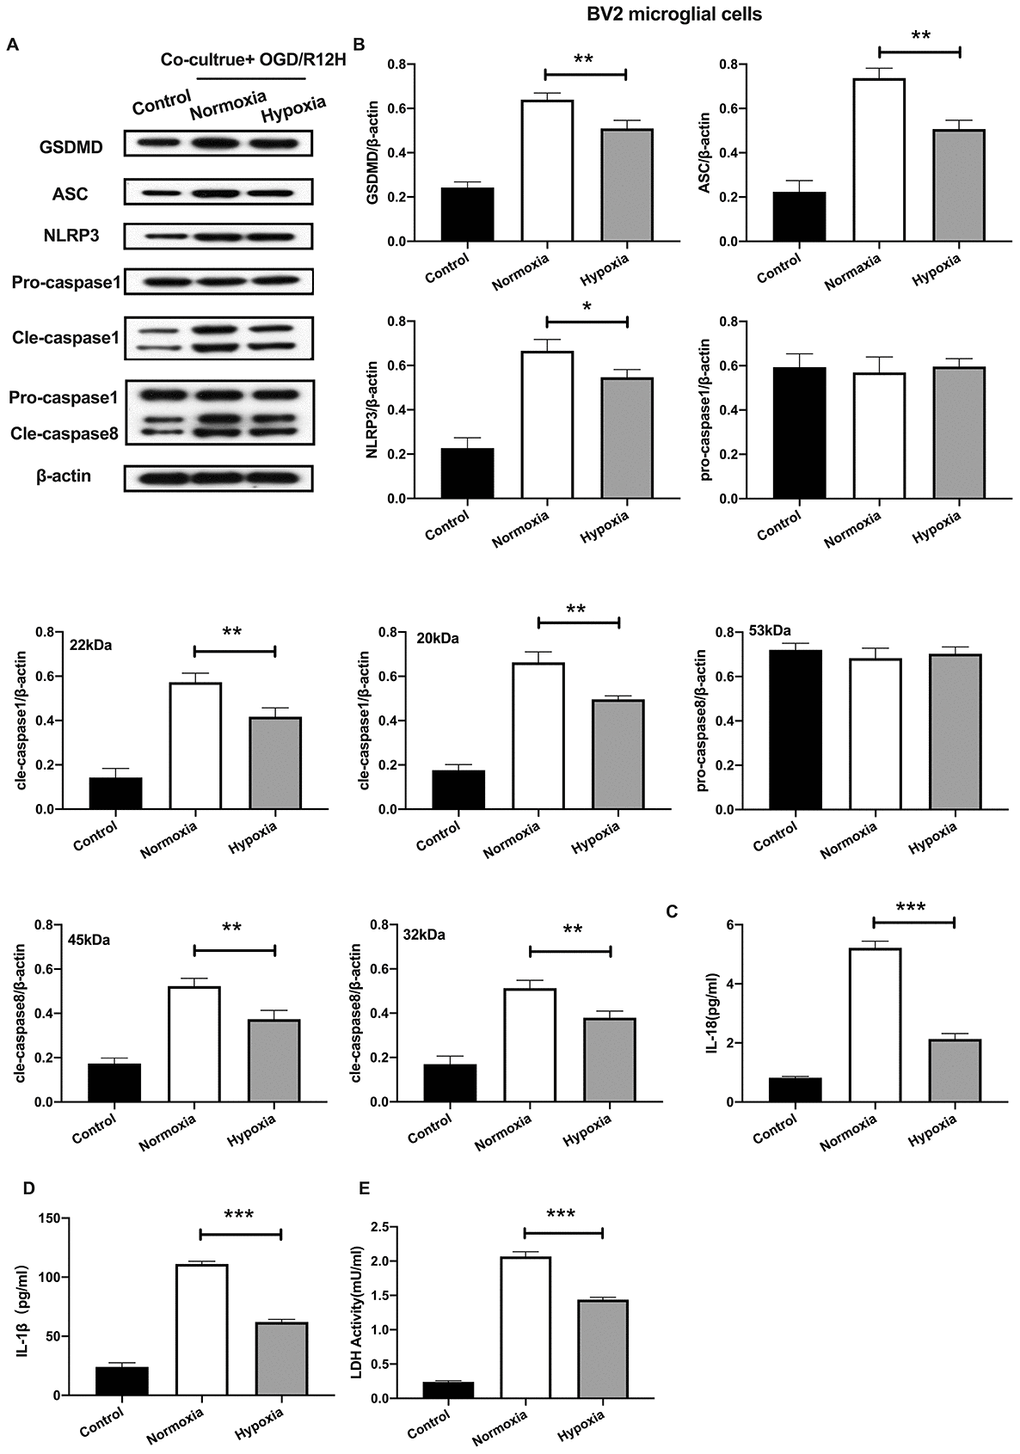 Hypoxia-preconditioned OM-MSCs attenuated cerebral OGD/R-induced pyroptosis in BV2 microglial cells. (A, B) Expression of NLRP3, ASC, pro-caspase1, cleaved-caspase1, pro-caspase8, cleaved-caspase8 and GSDMD in BV2 microglial cells as quantified by Western blotting analysis. (C, D) Level of IL-1β and IL-18 in BV2 microglial cells as measured using ELISA. (E) The level of LDH activity in BV2 microglial cells as measured by ELISA. All data are presented as the mean value ±SD. *p